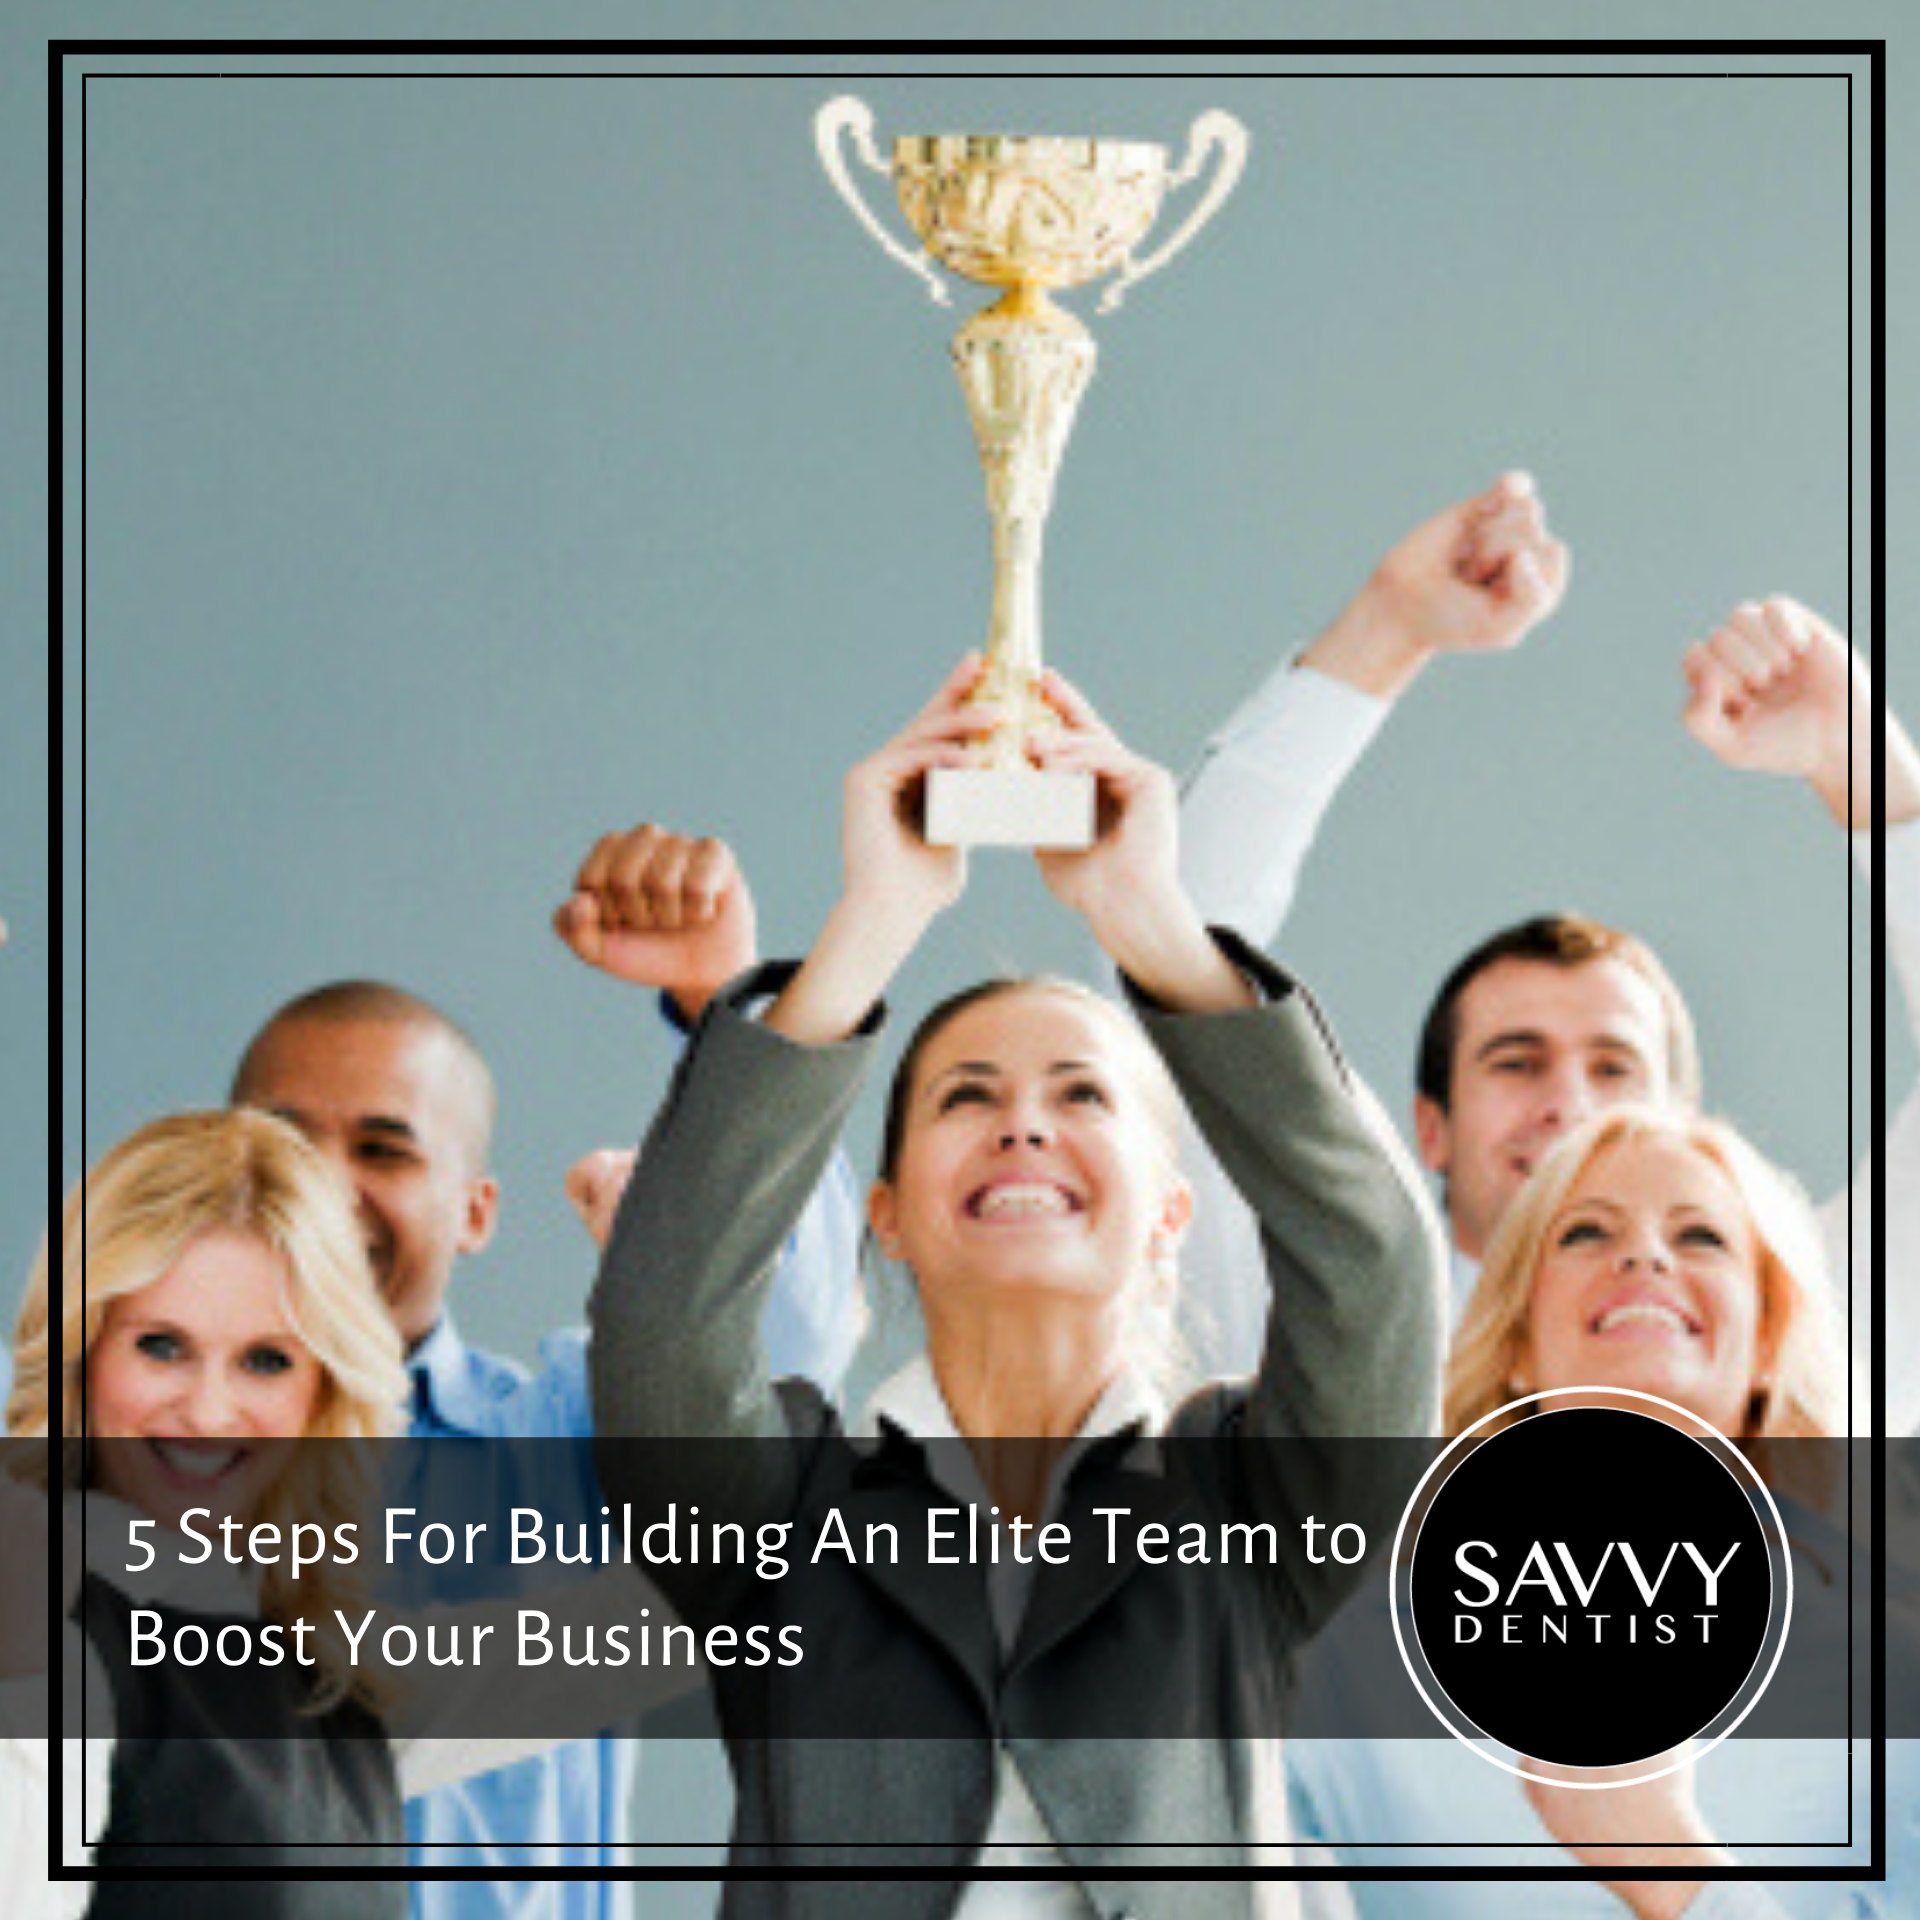 5 Steps For Building An Elite Team to Boost Your Business